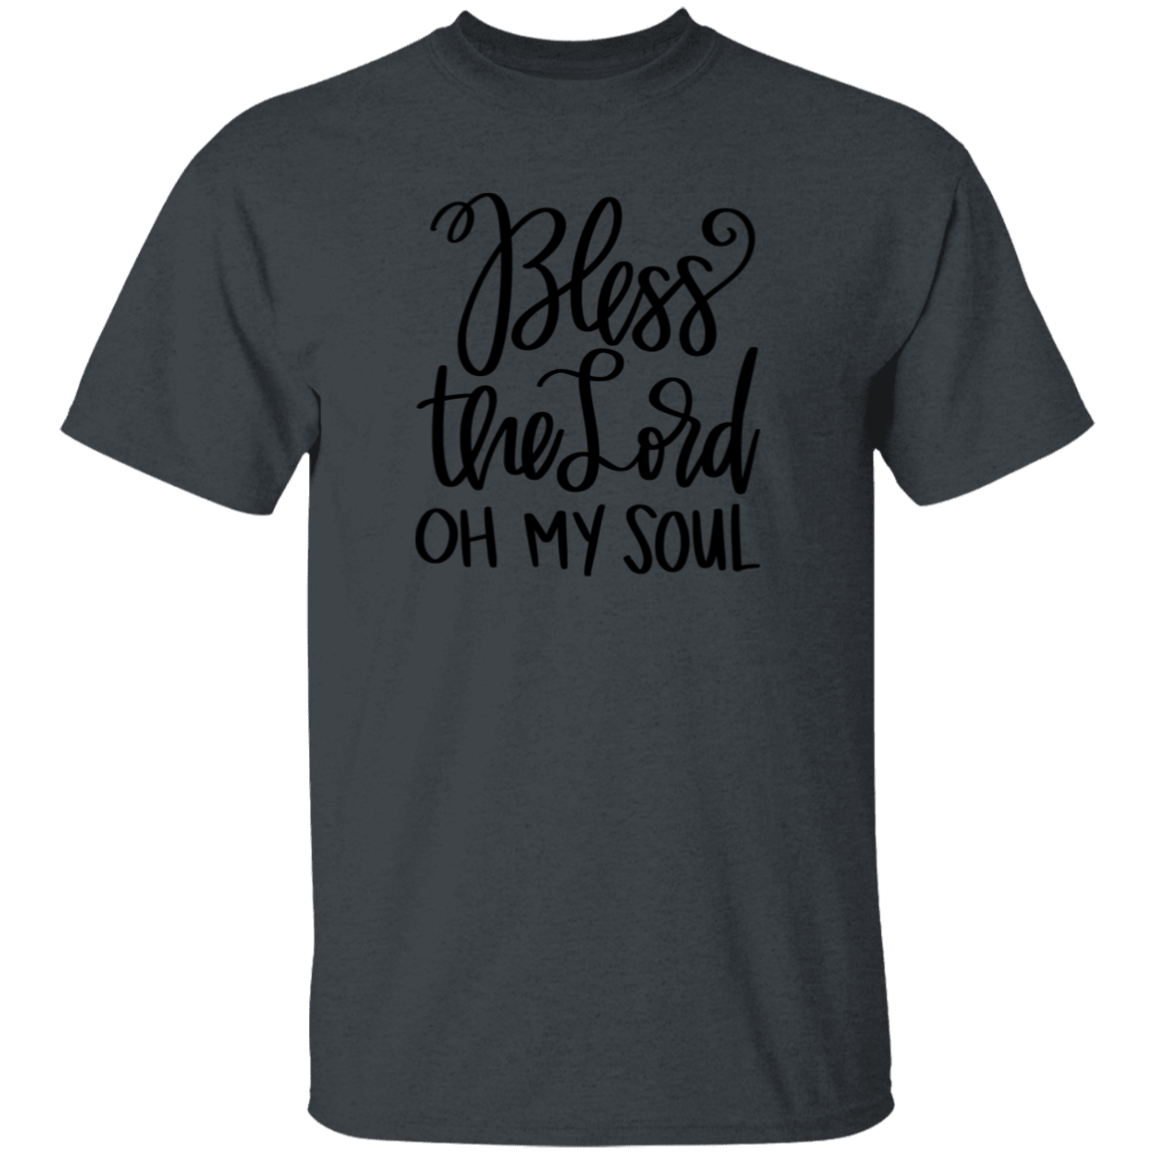 Bless the Lord oh my soul | T-Shirt